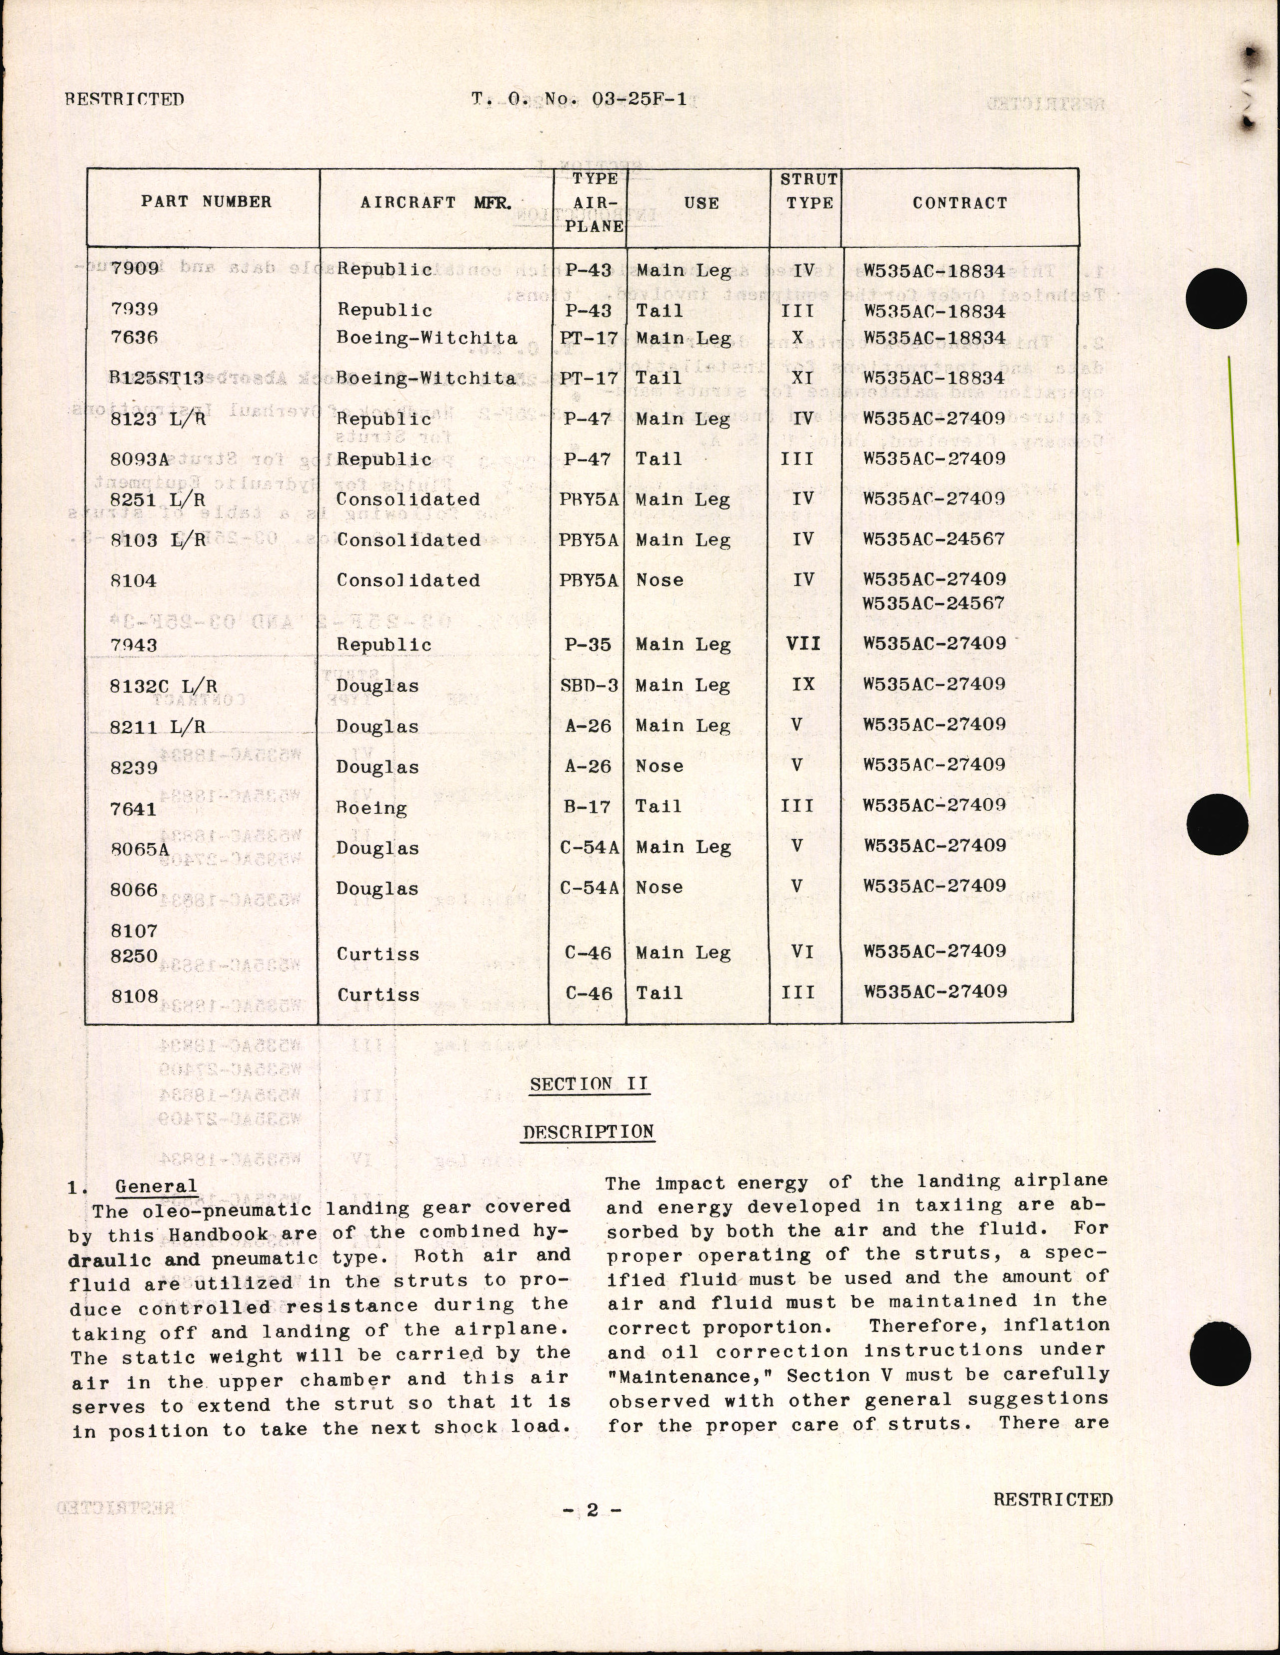 Sample page 6 from AirCorps Library document: Handbook of Operation and Service Instructions for Struts